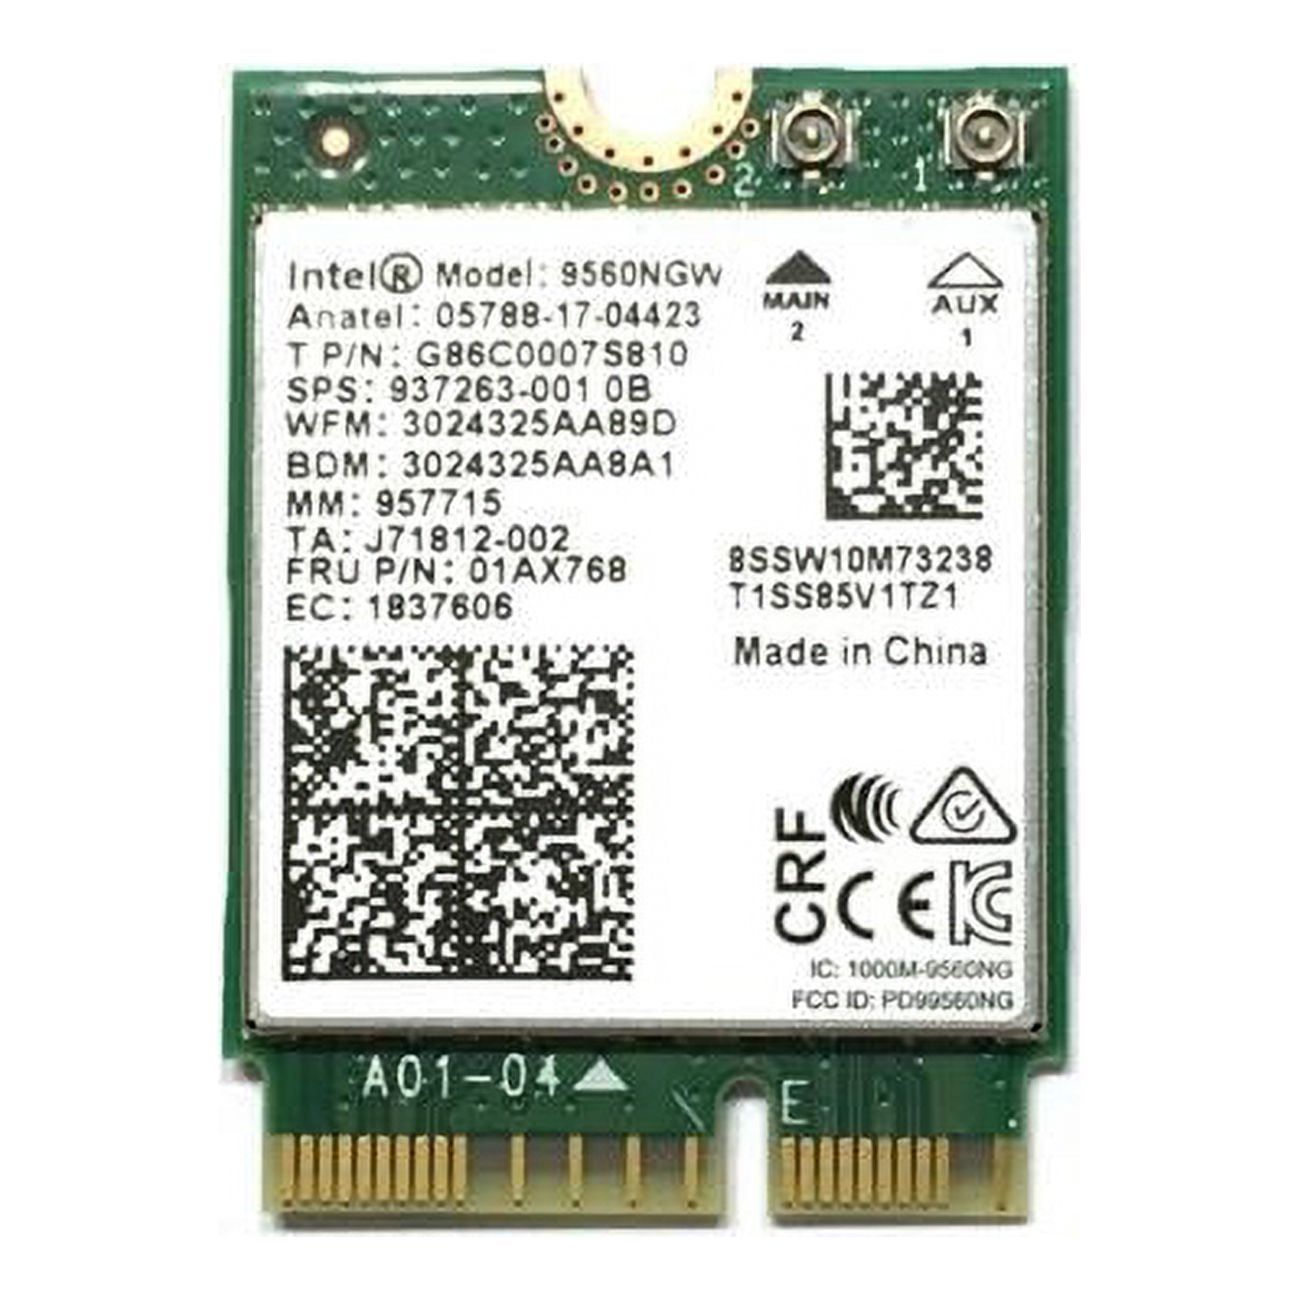 Picture of Intel 9560.NGWG.NV 2230 2 x 2 in. AC Plus BT Gigabit No vPro Wireless Networking